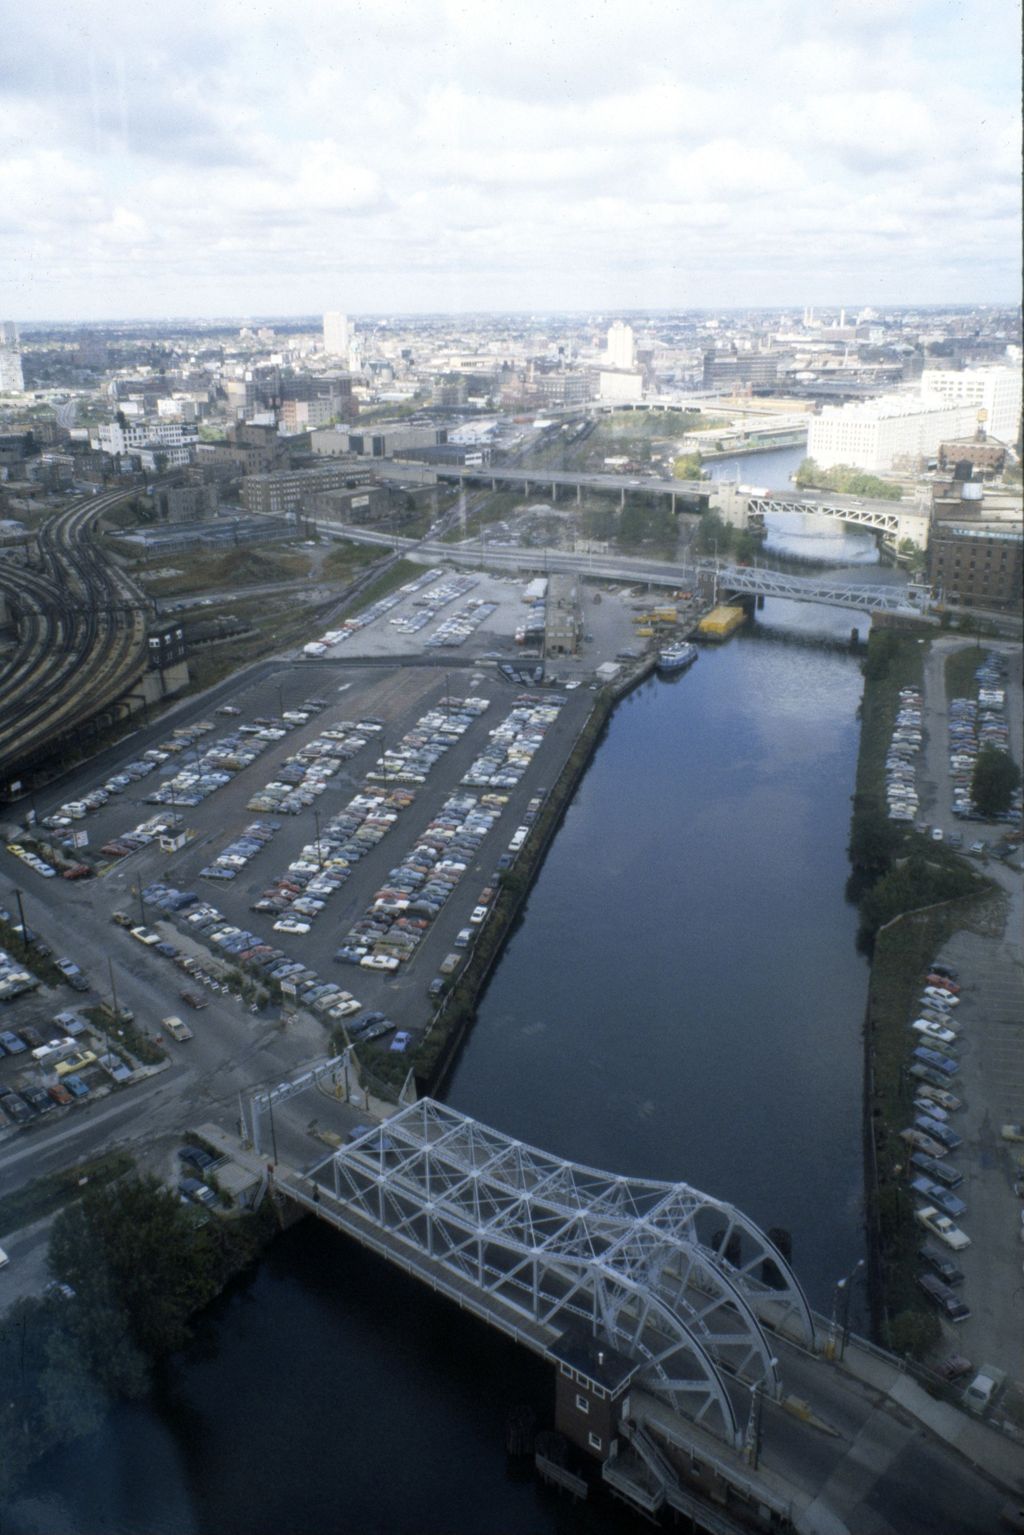 Parking lots along the North Branch of the Chicago River